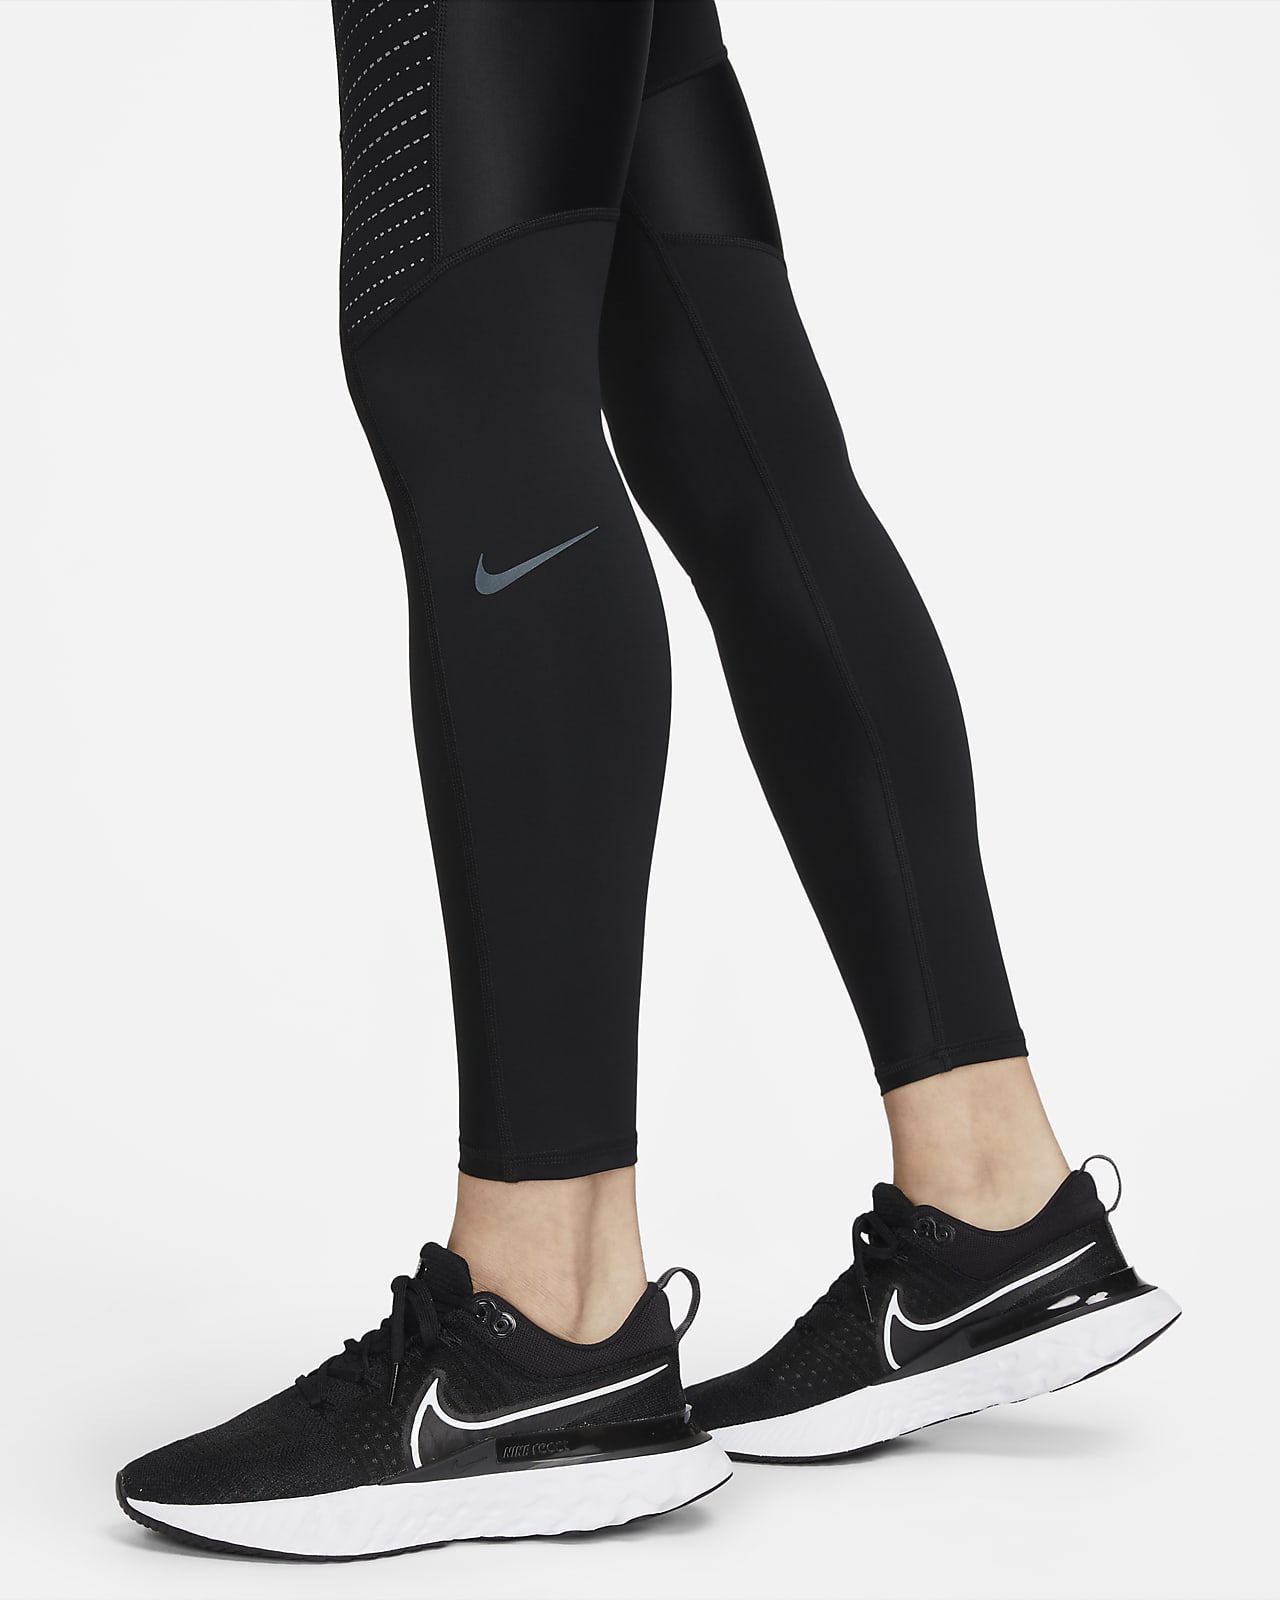 Nike Dri-FIT Run Division Epic Luxe Women's Mid-Rise Pocket Running ...